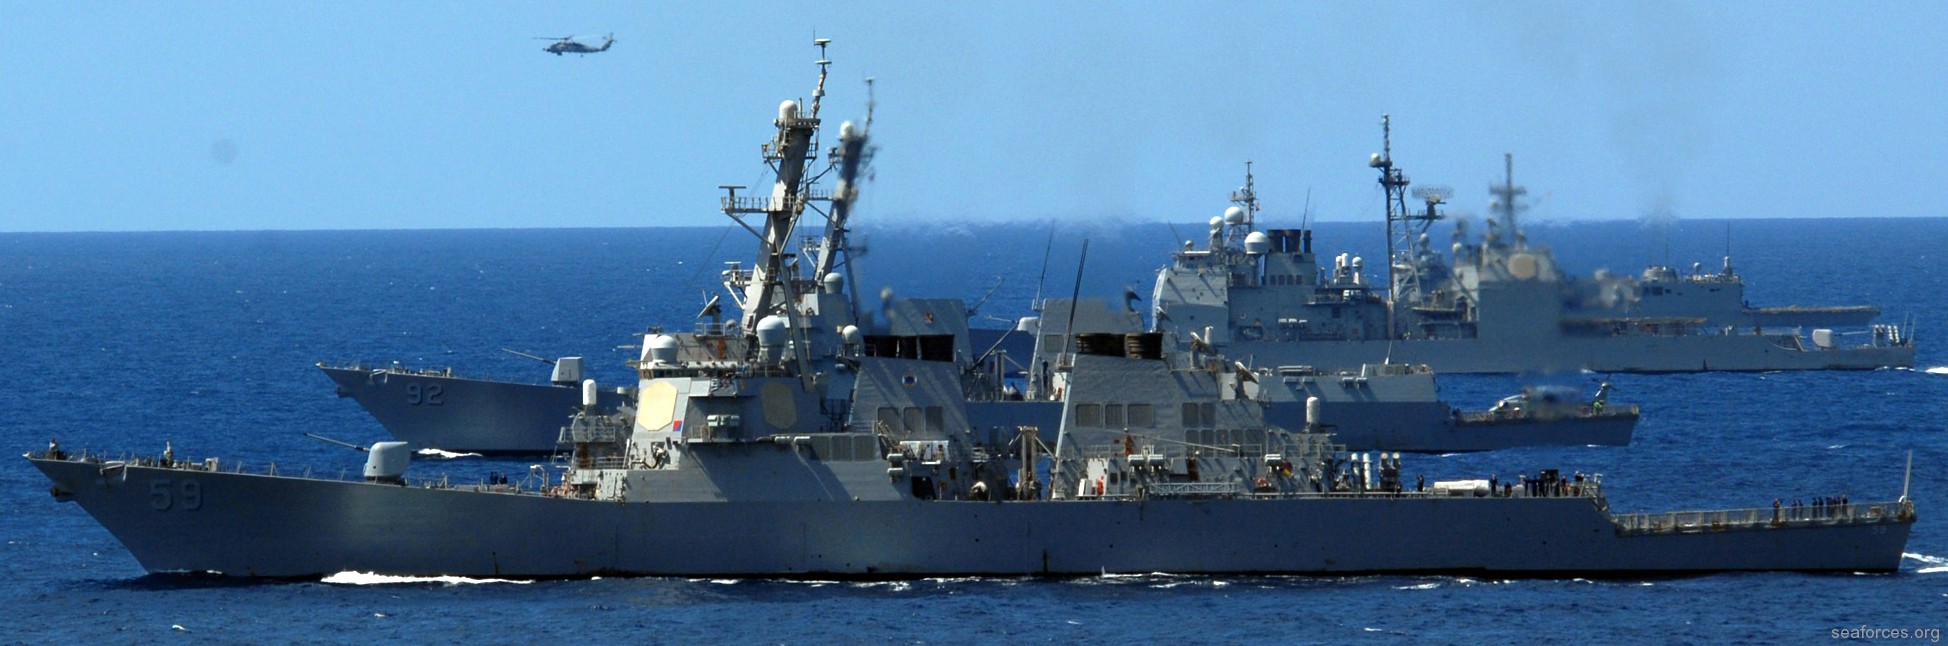 ddg-59 uss russell guided missile destroyer us navy 23